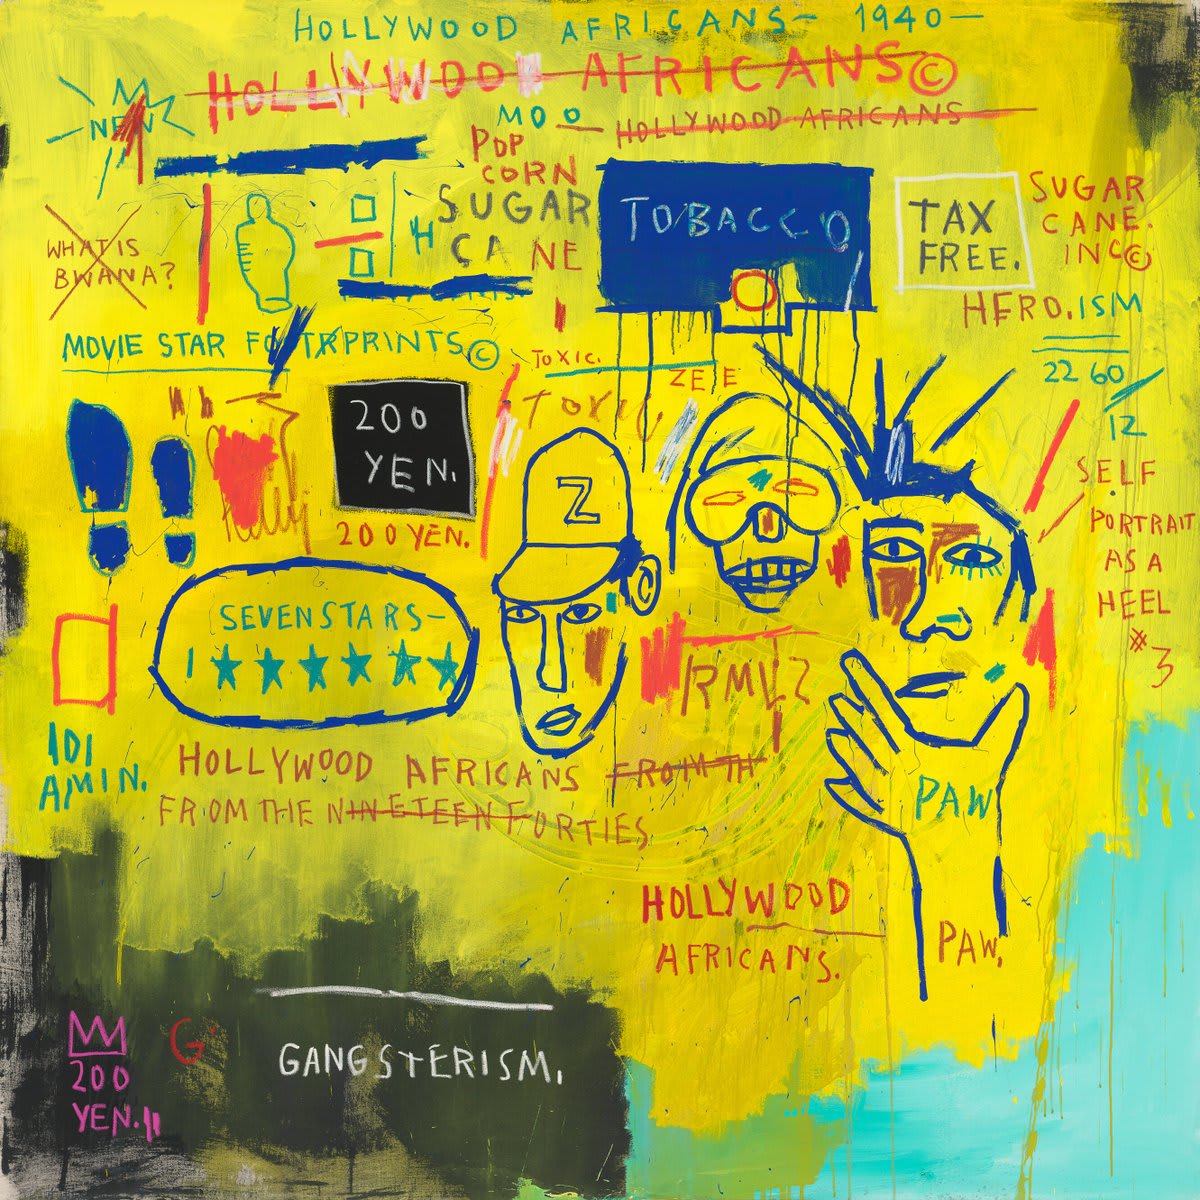 Today we're sharing Hollywood Africans (1983) by Jean-Michel Basquiat, who was born onthisday in 1960. Hollywood Africans is one of a series of Basquiat's paintings that feature images and texts relating to stereotypes of African Americans in the entertainment industry.